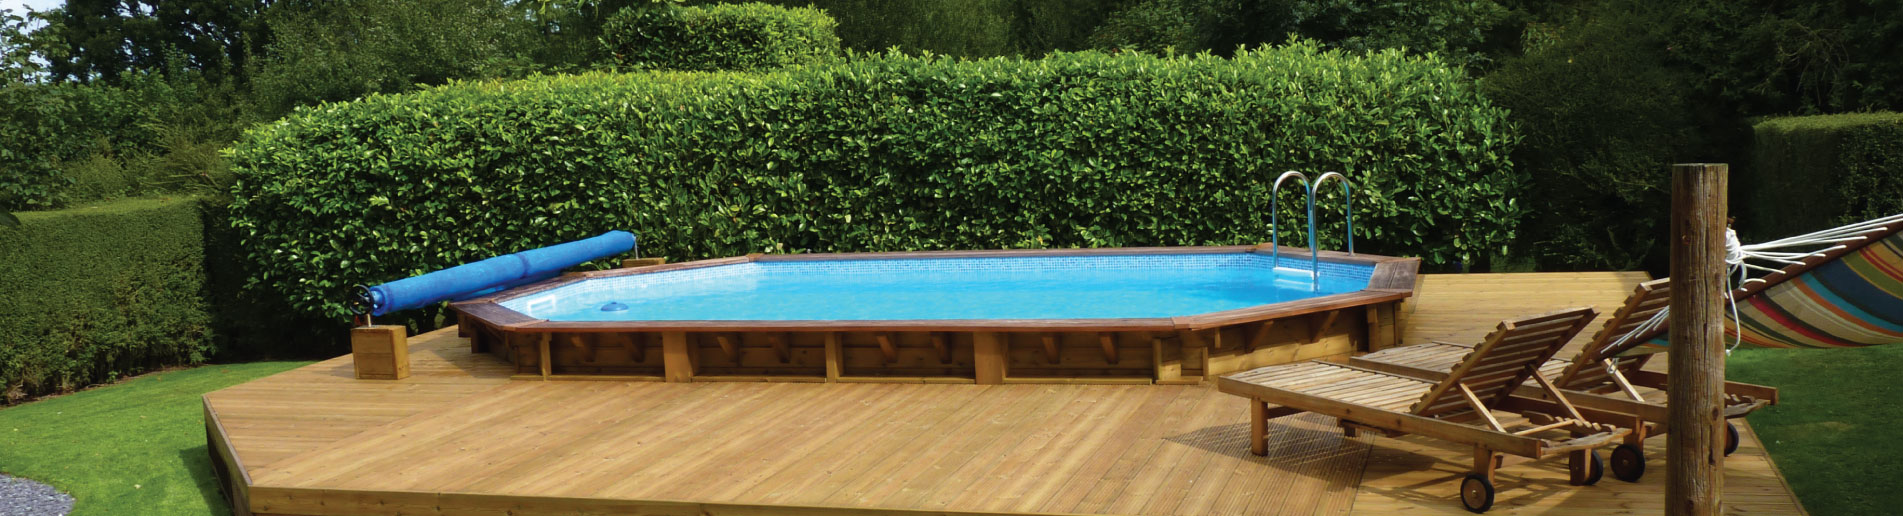 Happy Times with a Plastica Wooden Pool